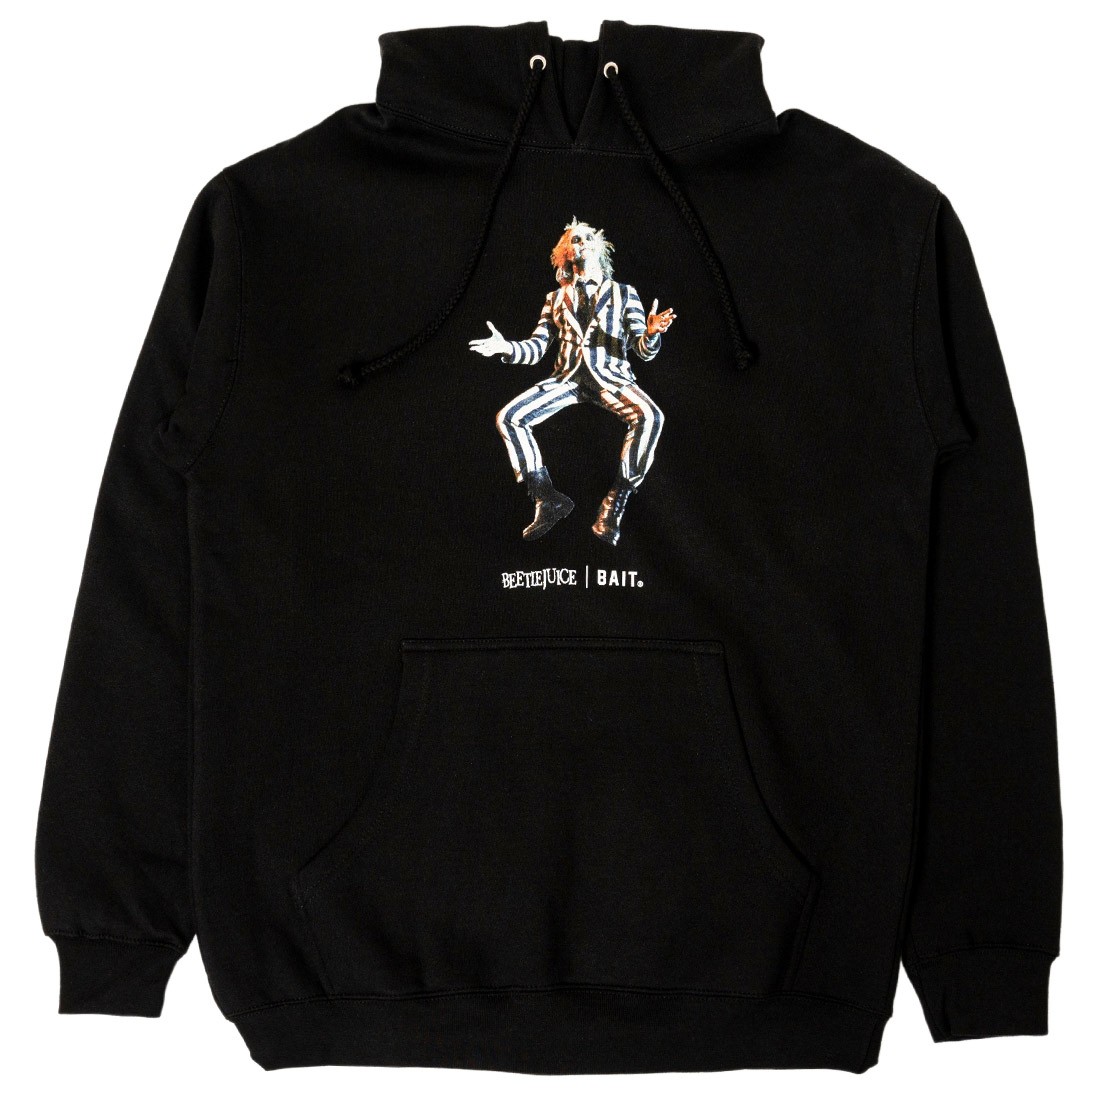 Cheap Atelier-lumieres Jordan Outlet x Friday The 13th Men Here Lie Betelgeuse Hoody (black)